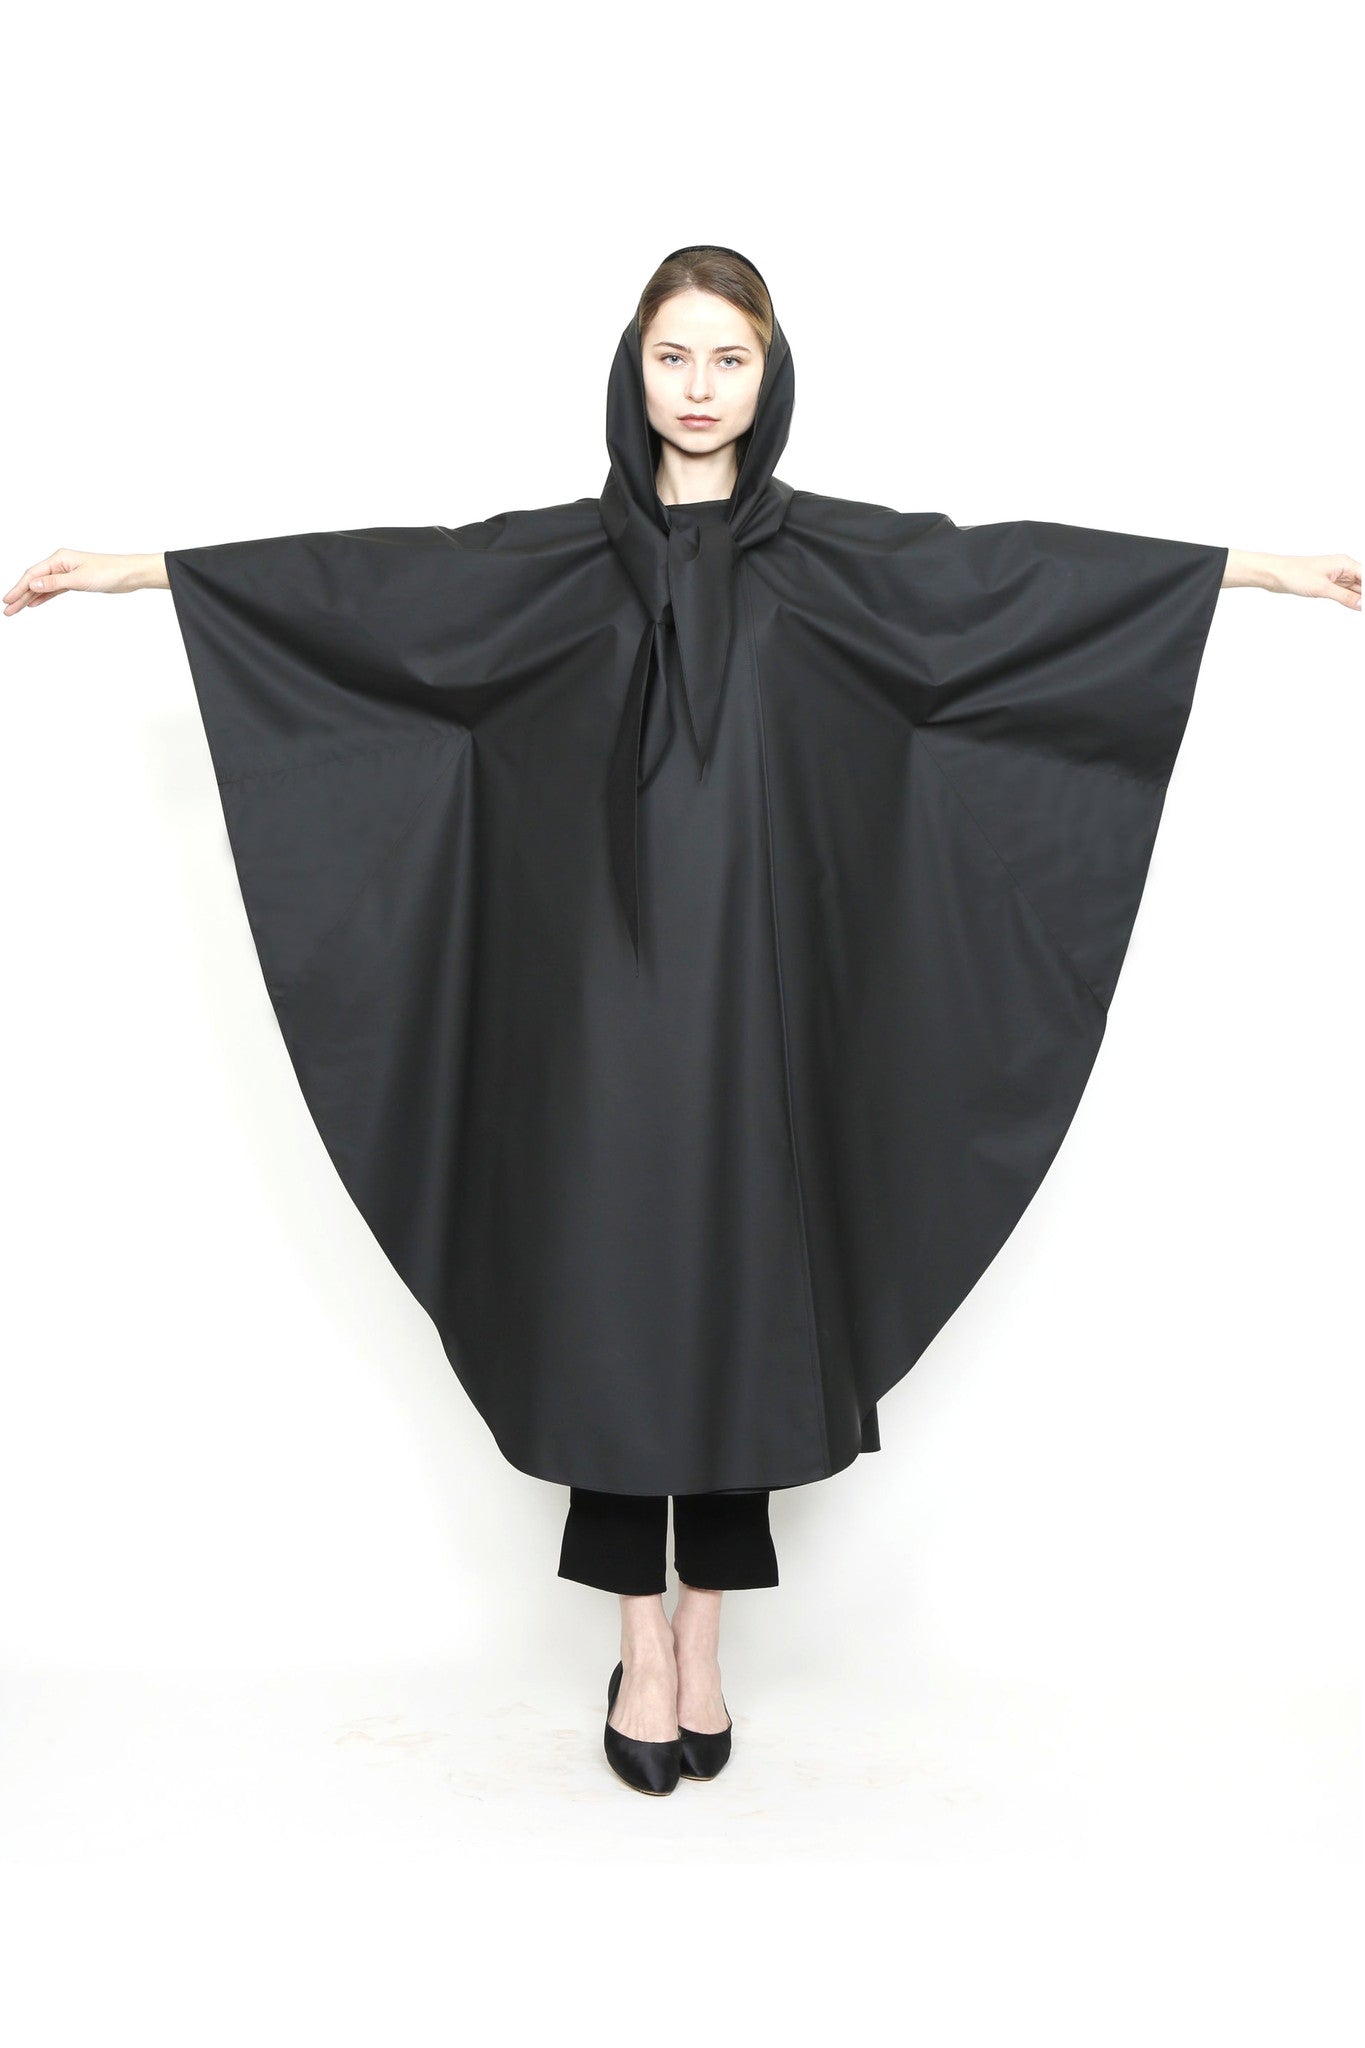 Zero Waste Sustainable One-Size-Fits-All Rain Cape in Water-Repellent Fabric-1